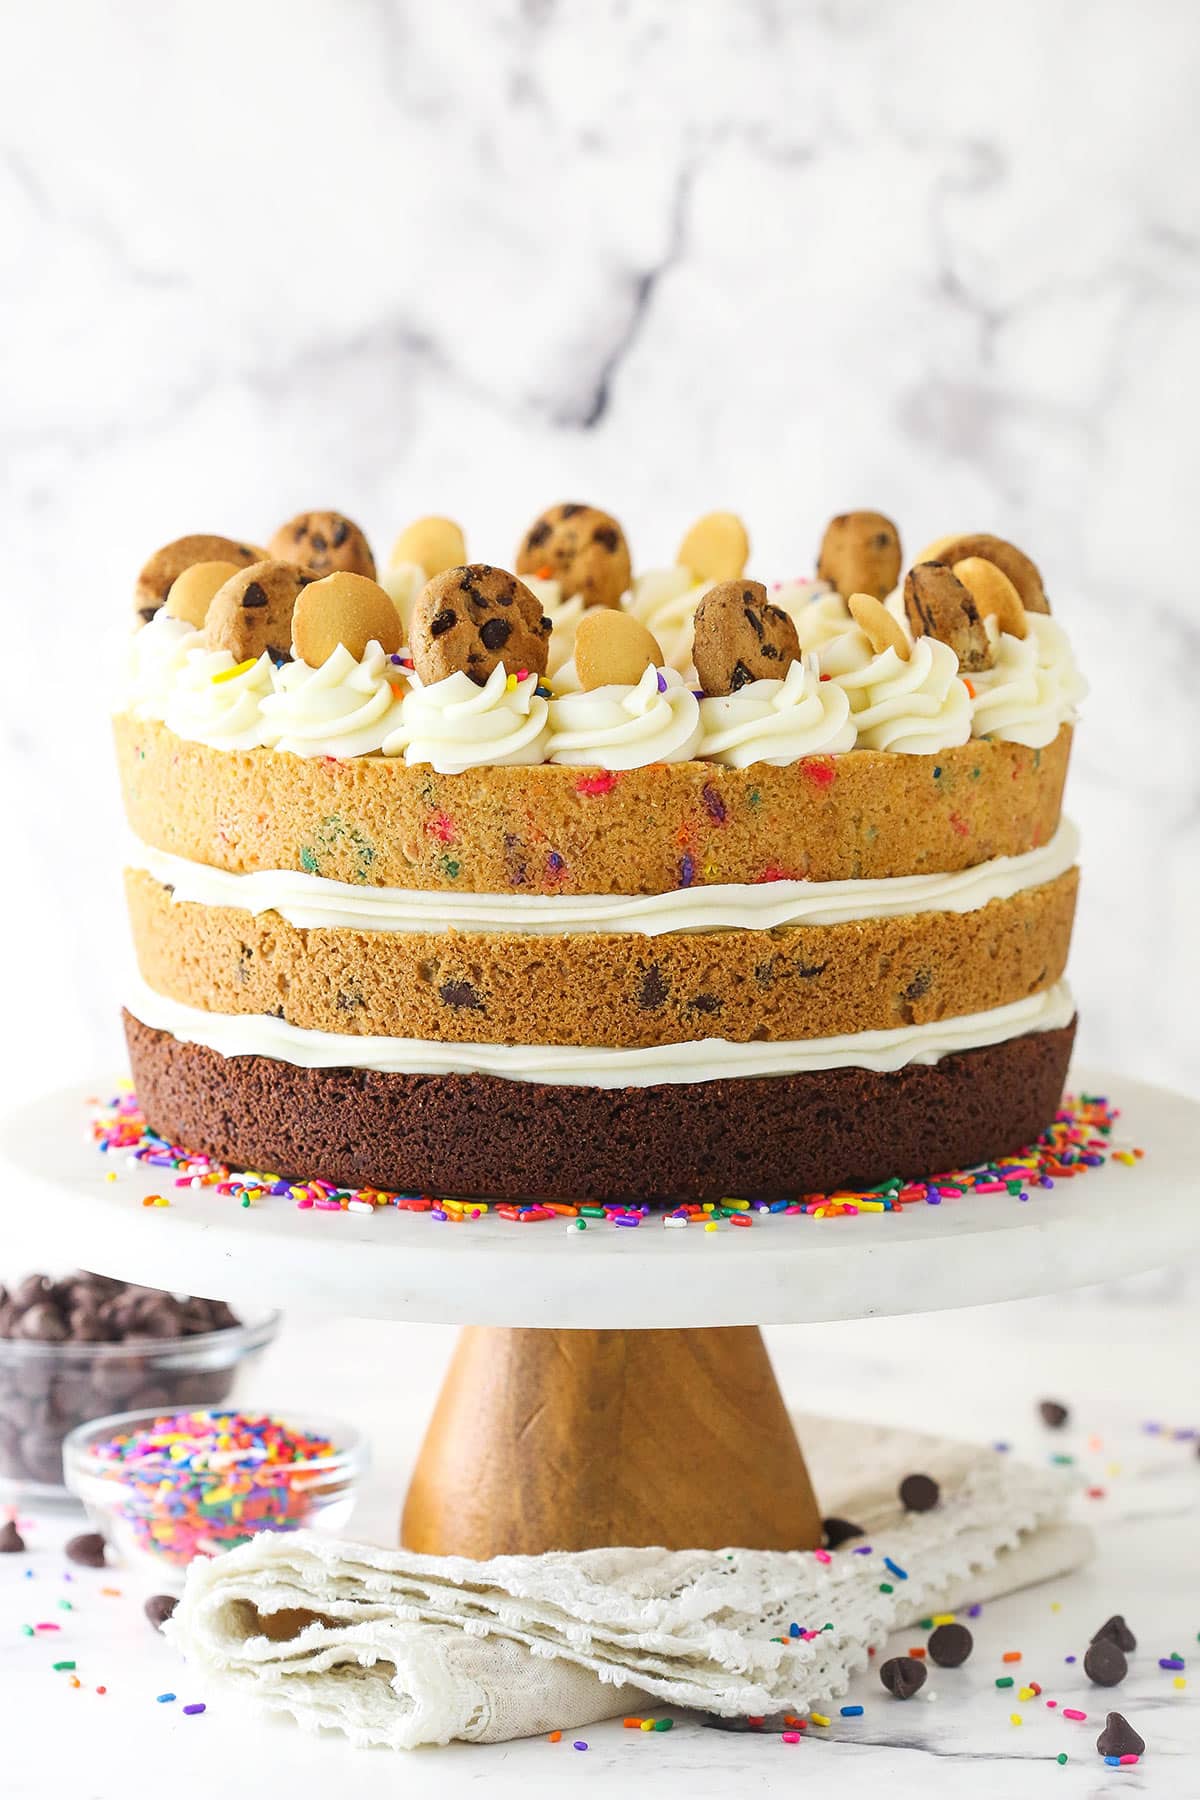 A double chocolate, chocolate chip and Funfetti cookie cake on a tall metal cake stand on top of a fancy cloth napkin with a lace trim